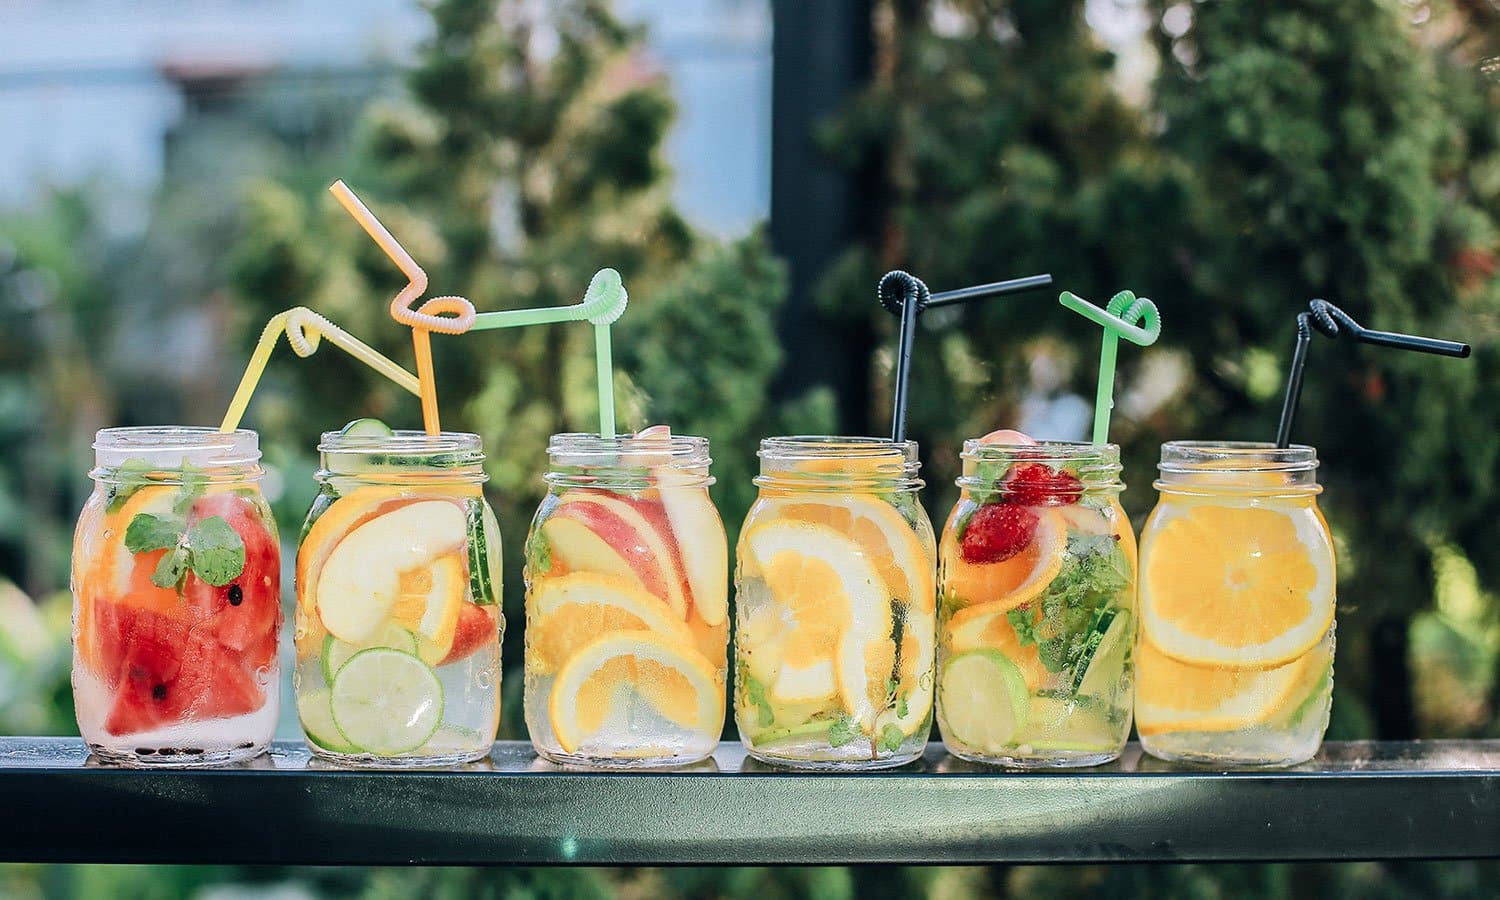 Six fruit-infused jars of water with straws on an outdoor table.